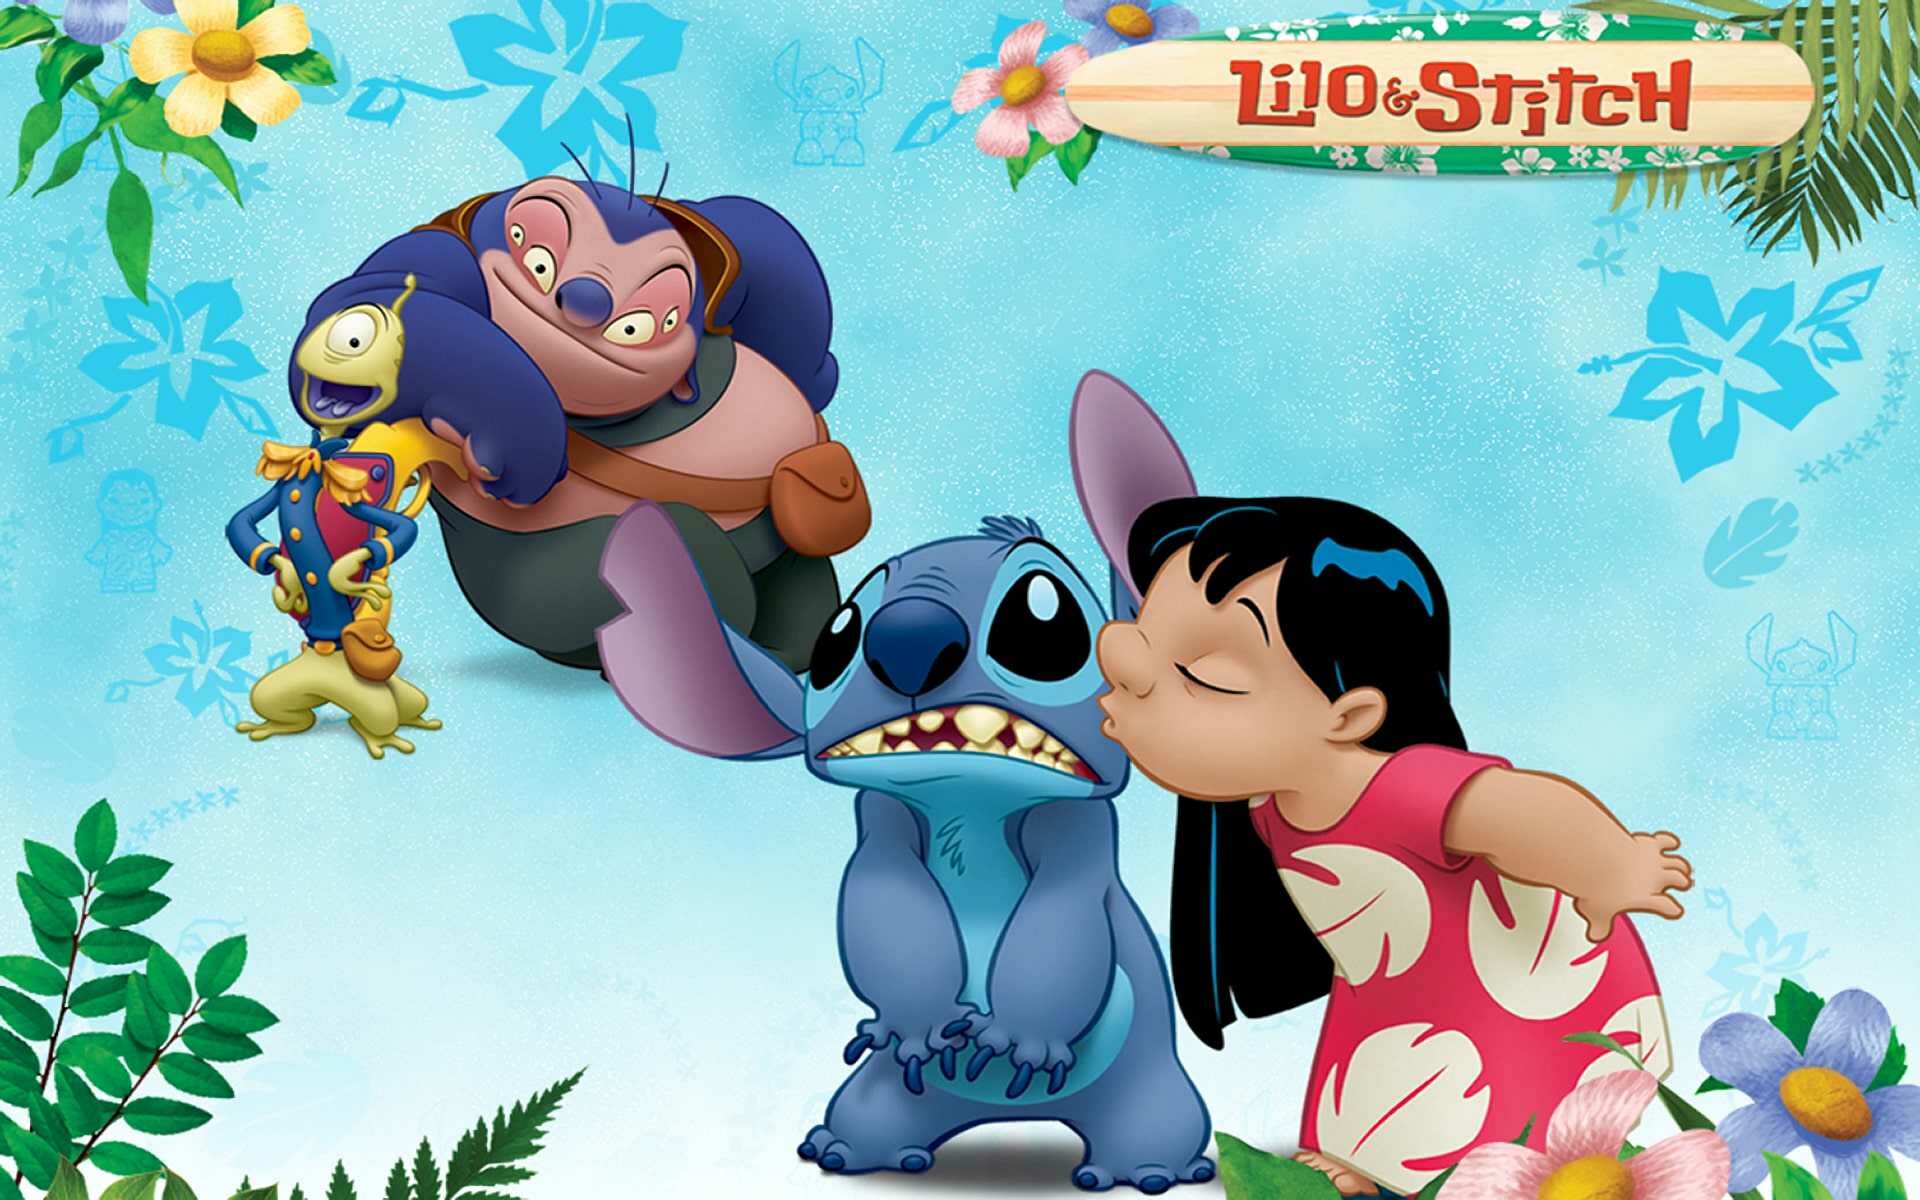 Lilo and Stitch: Dr. Jumba Jookiba, voiced by David Ogden Stiers, Pleakley, voiced by Kevin McDonald. 1920x1200 HD Wallpaper.